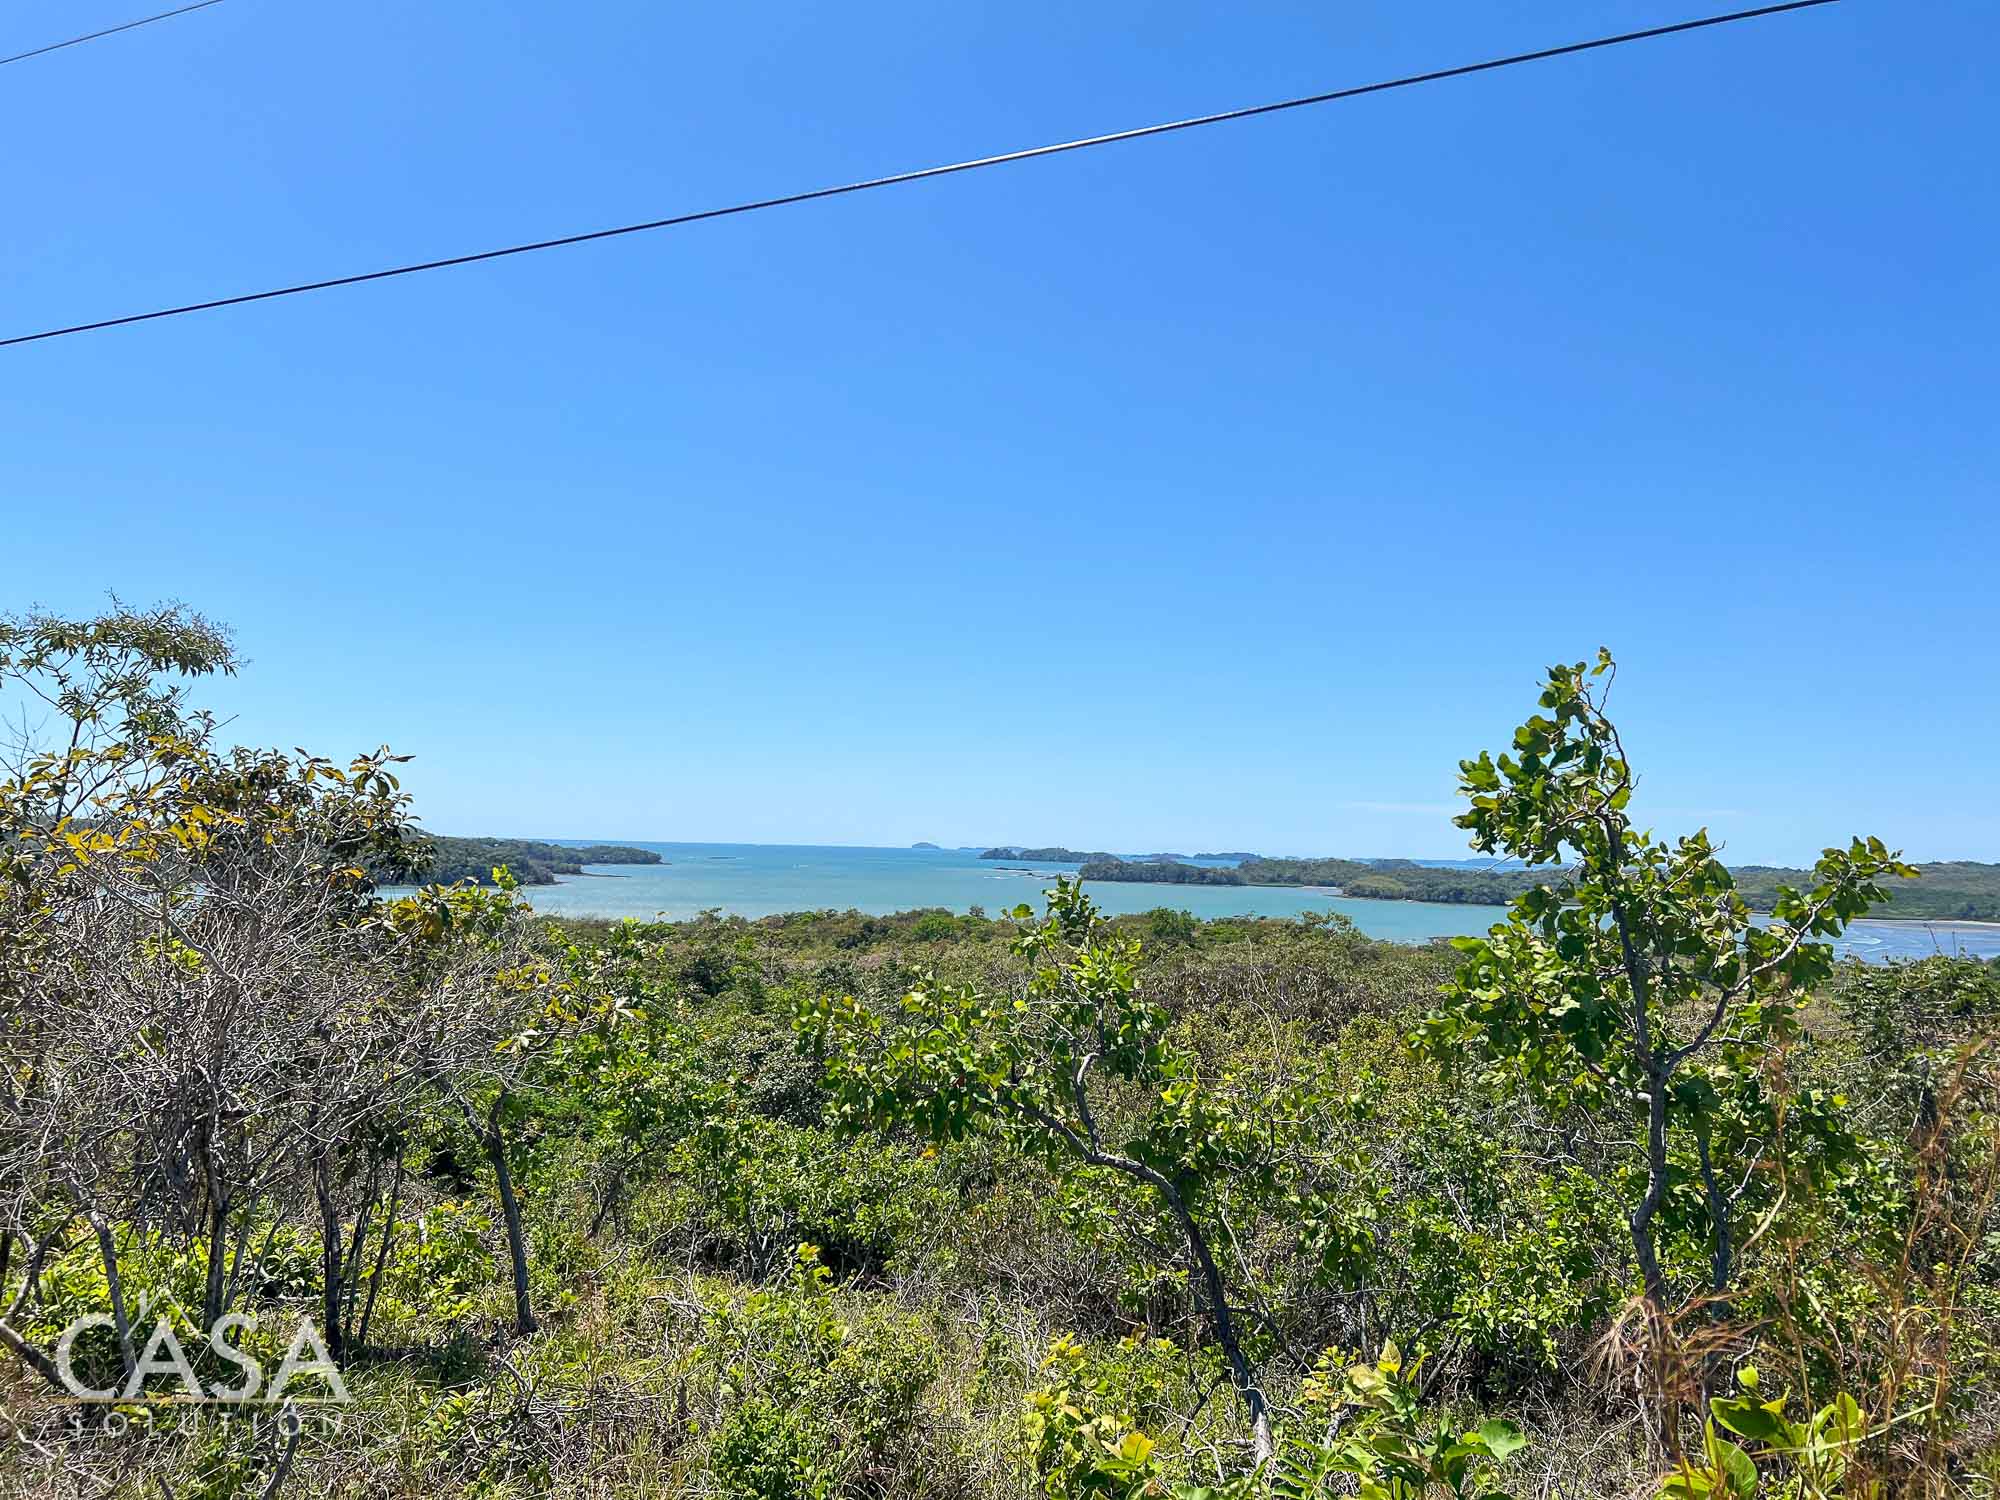 Choose from Six Lots for Sale in Boca Chica, Chiriqui. Build Your Dream Home Amidst Stunning Ocean Views